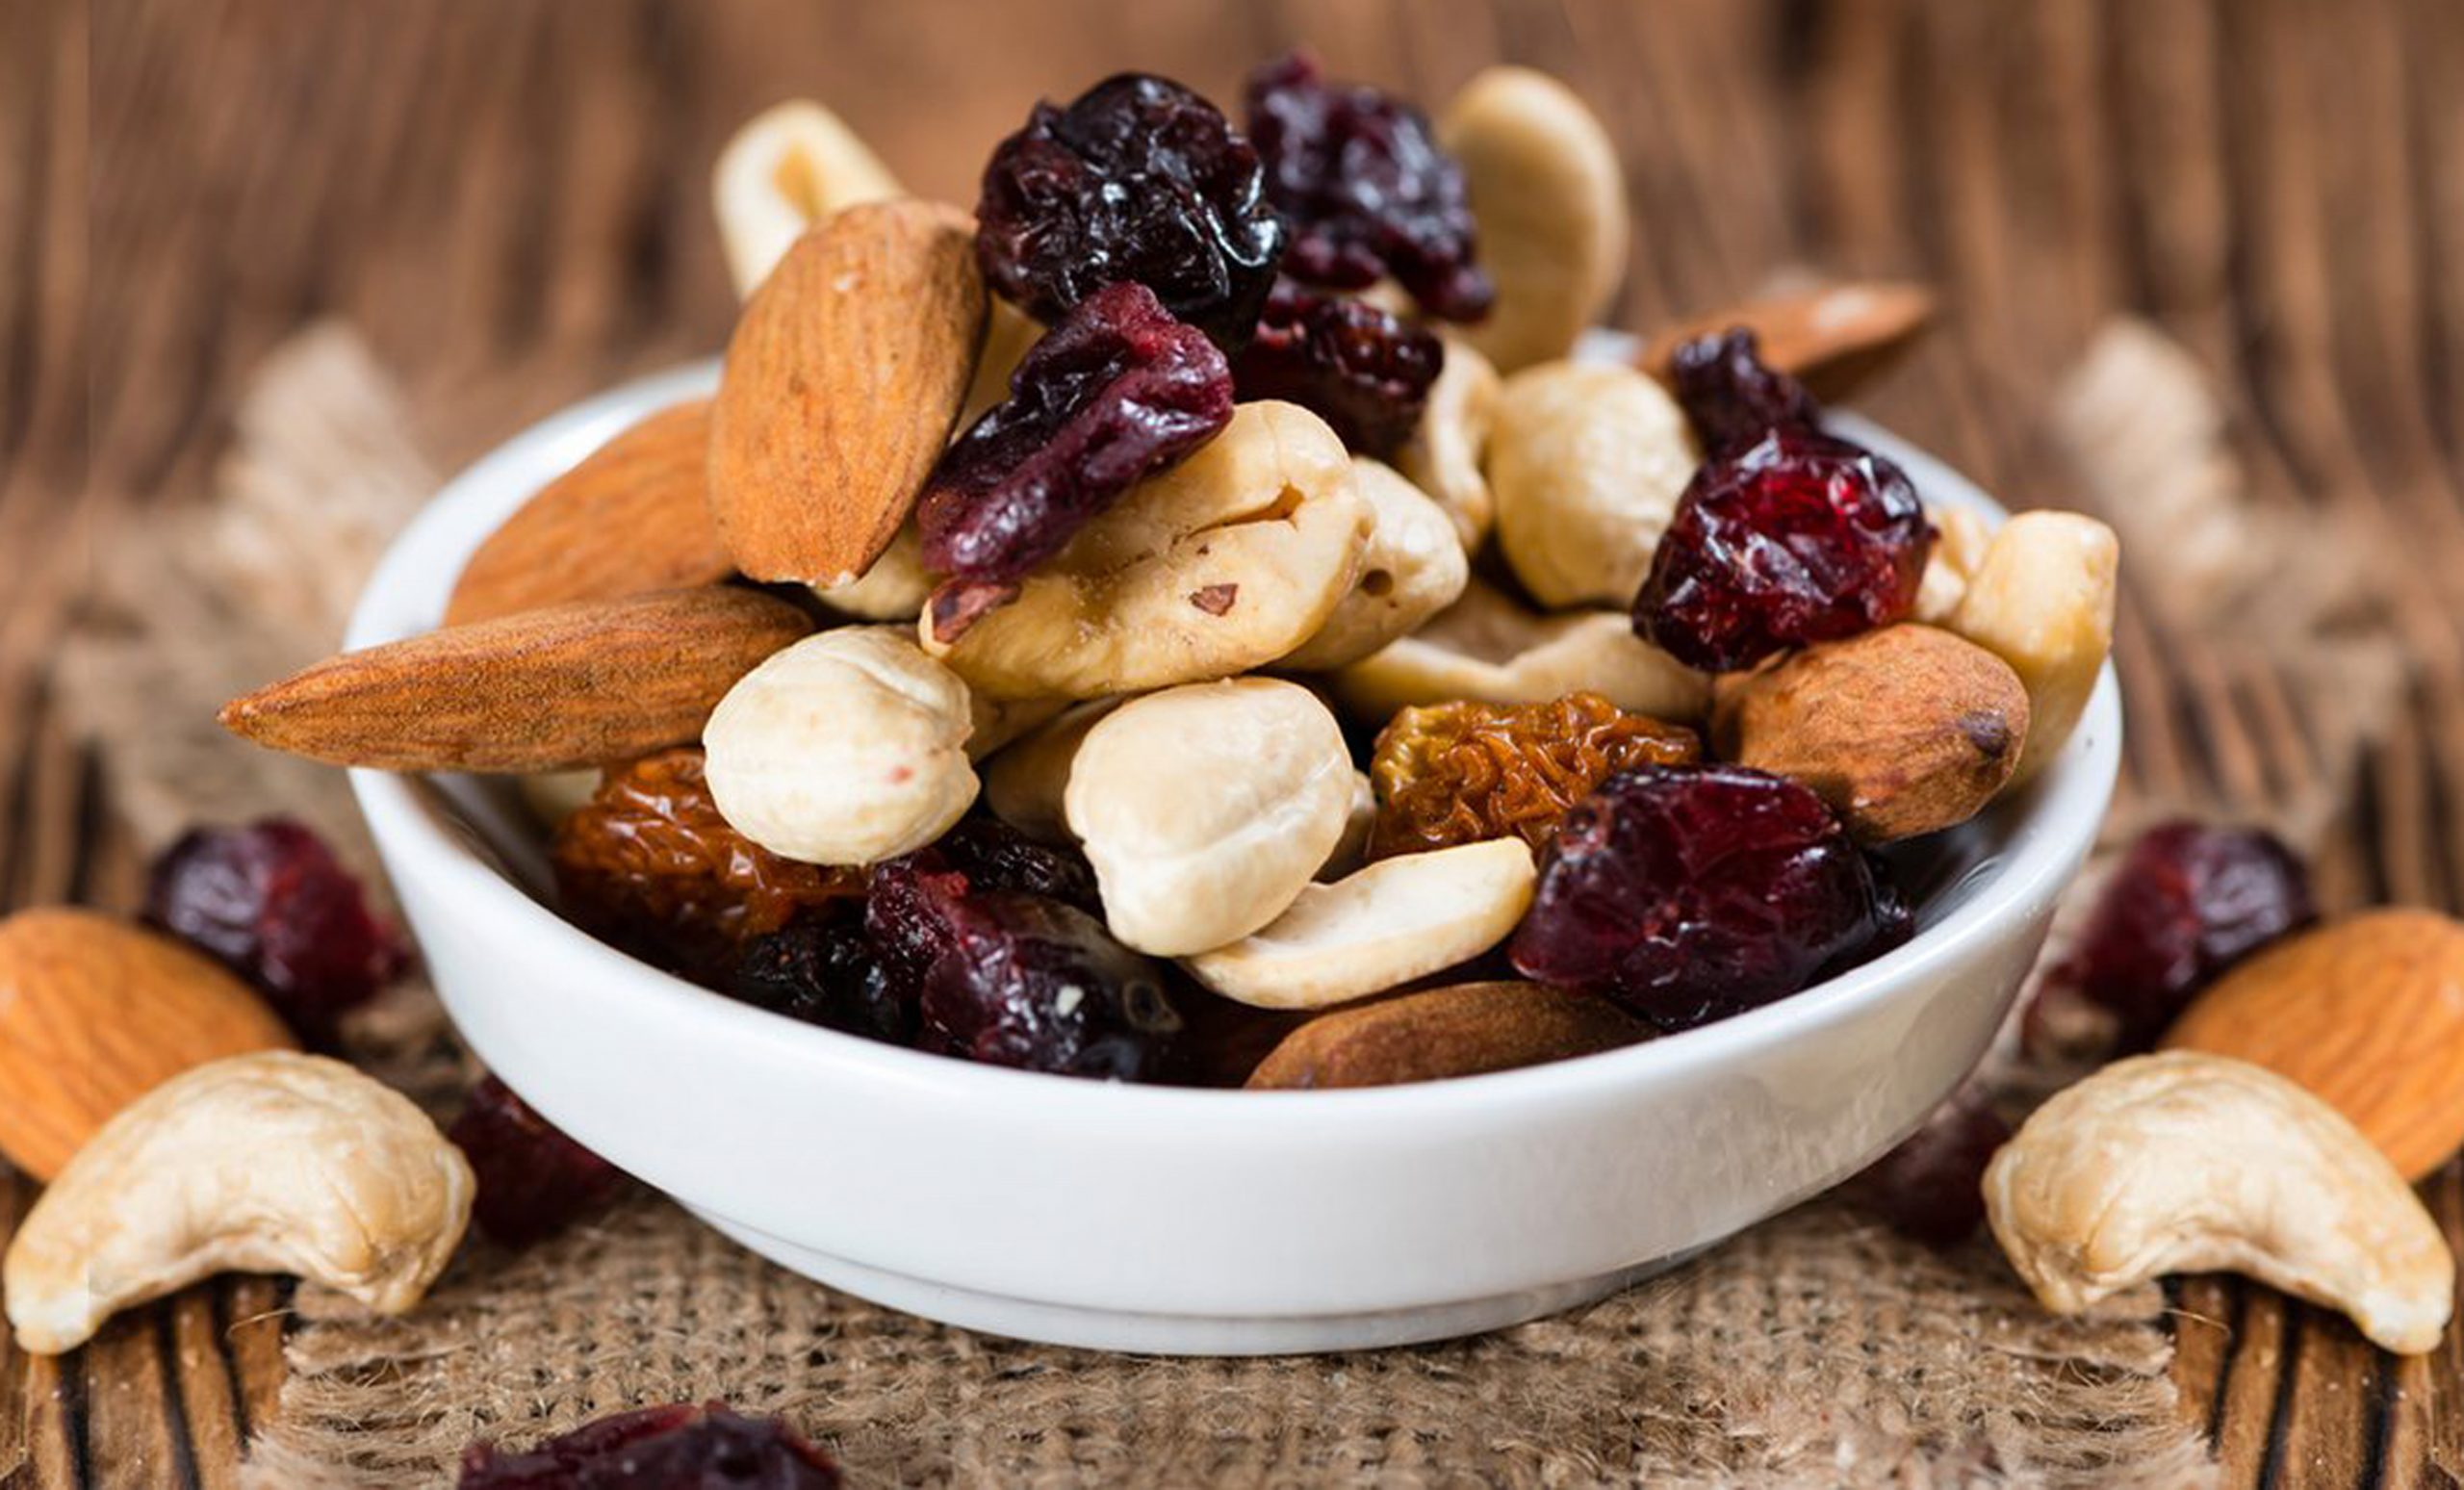 Wholesale Dried Fruit - Buy Organic Dried Fruits & Nuts | Wholesale Supplier - Nutex Company